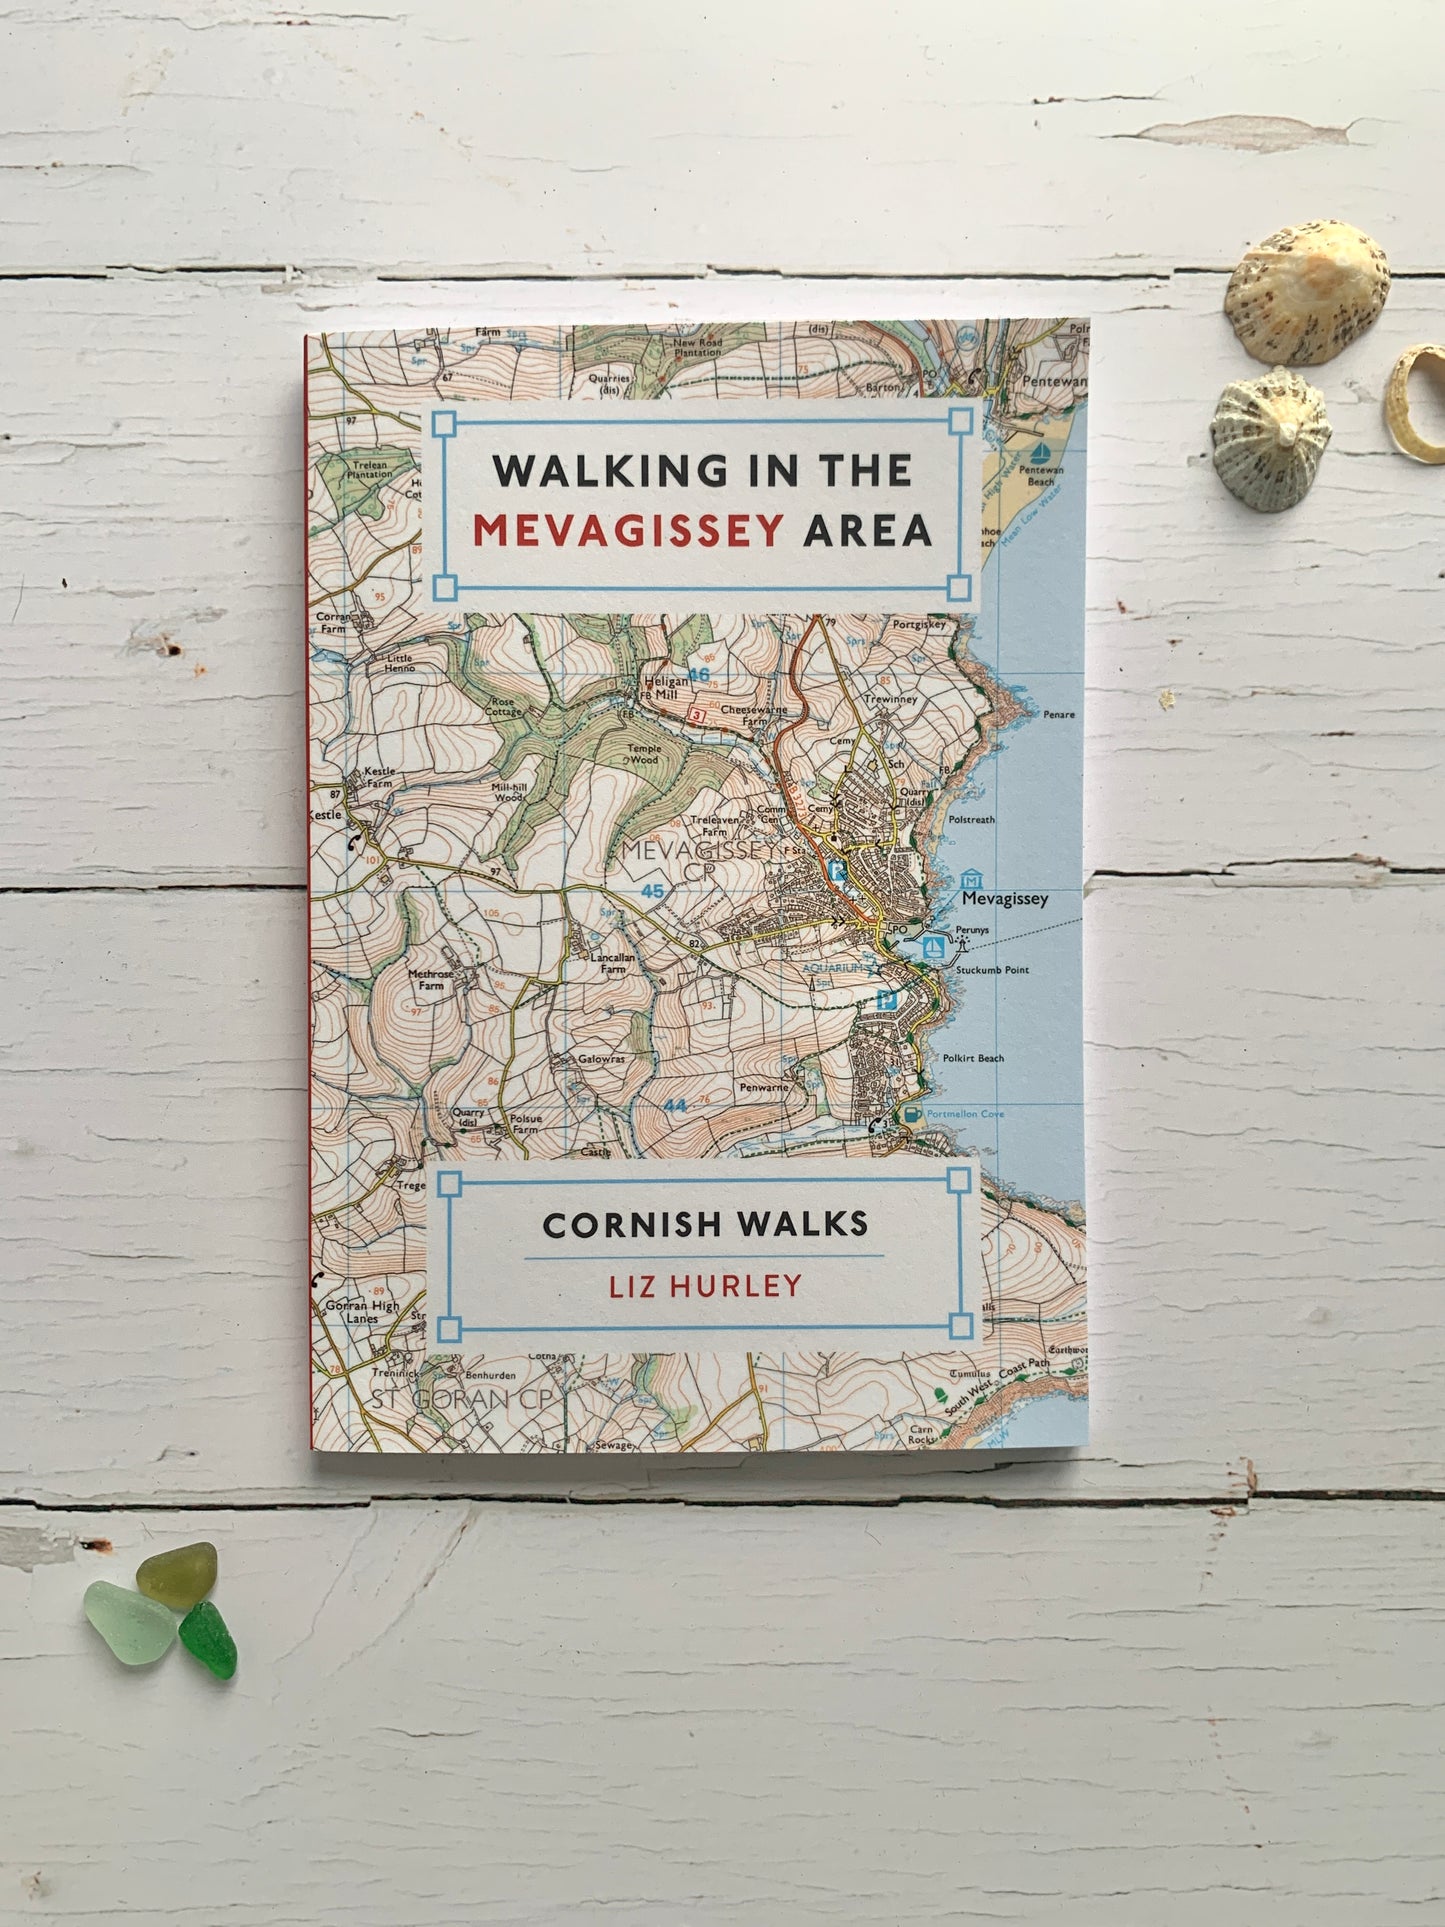 Walking in the Mevagissey Area book